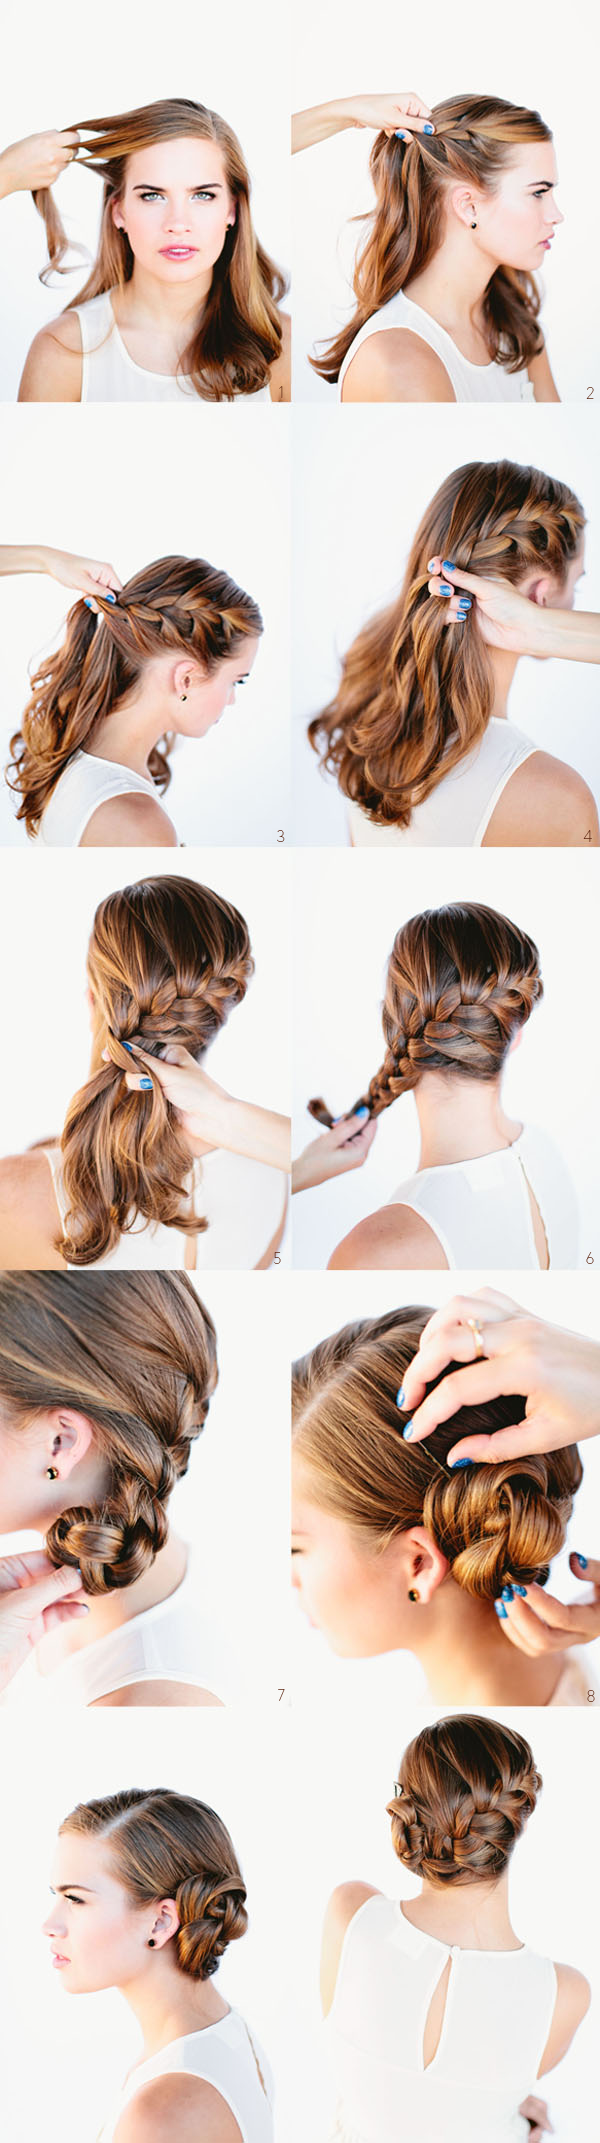 9 Types of Classy Braided Hairstyle Tutorials You Should Try Pretty 